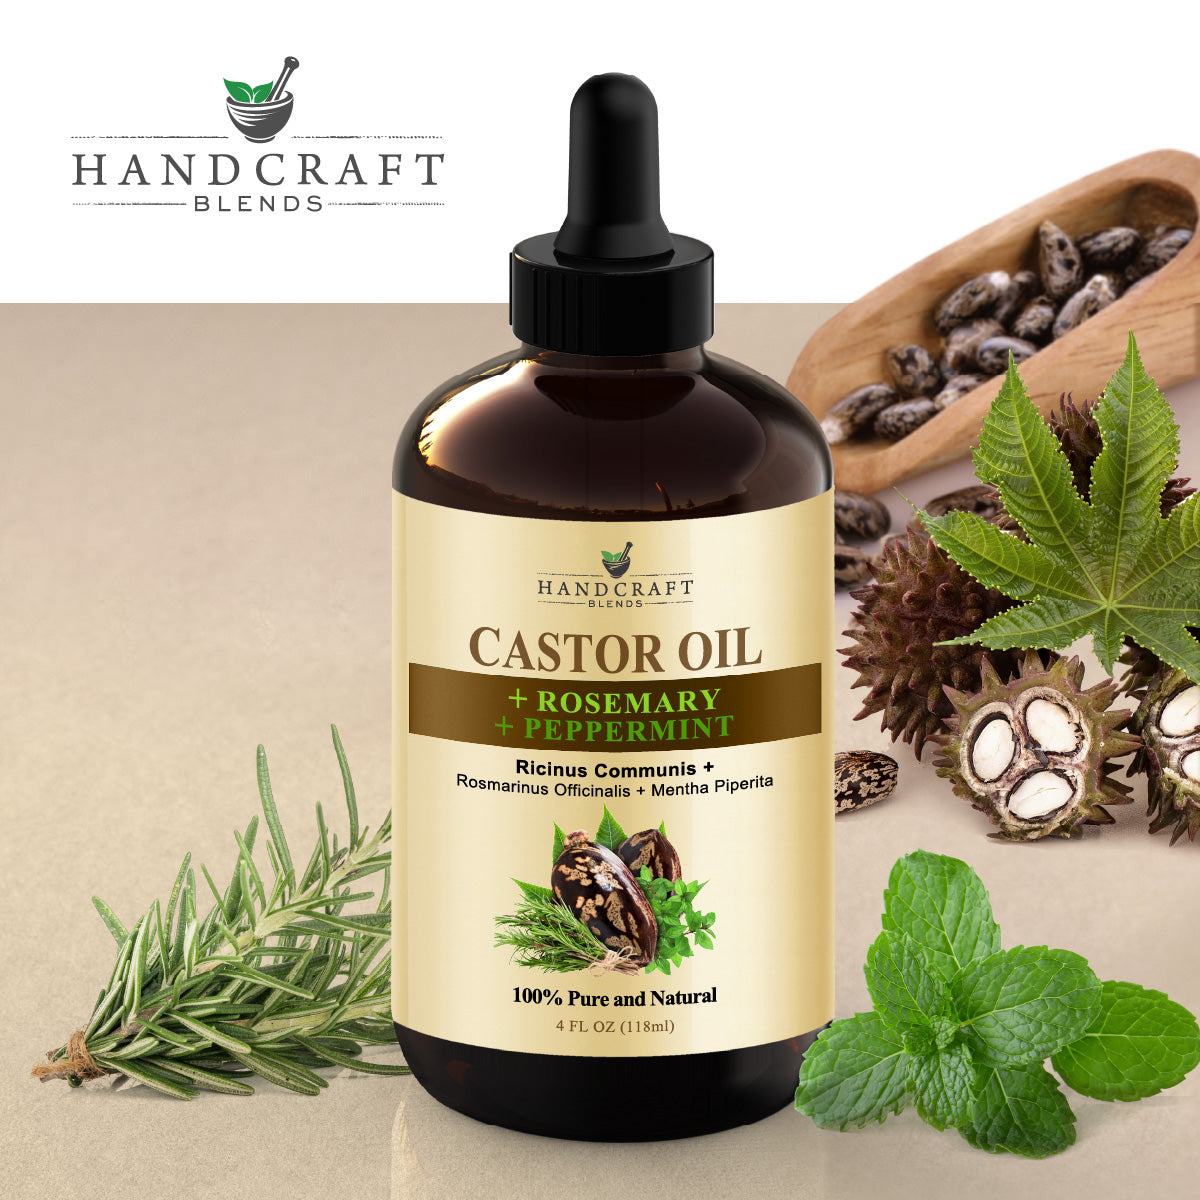 Handcraft Castor Oil + Rosemary + Peppermint Oil - 100% Pure and Natur ...